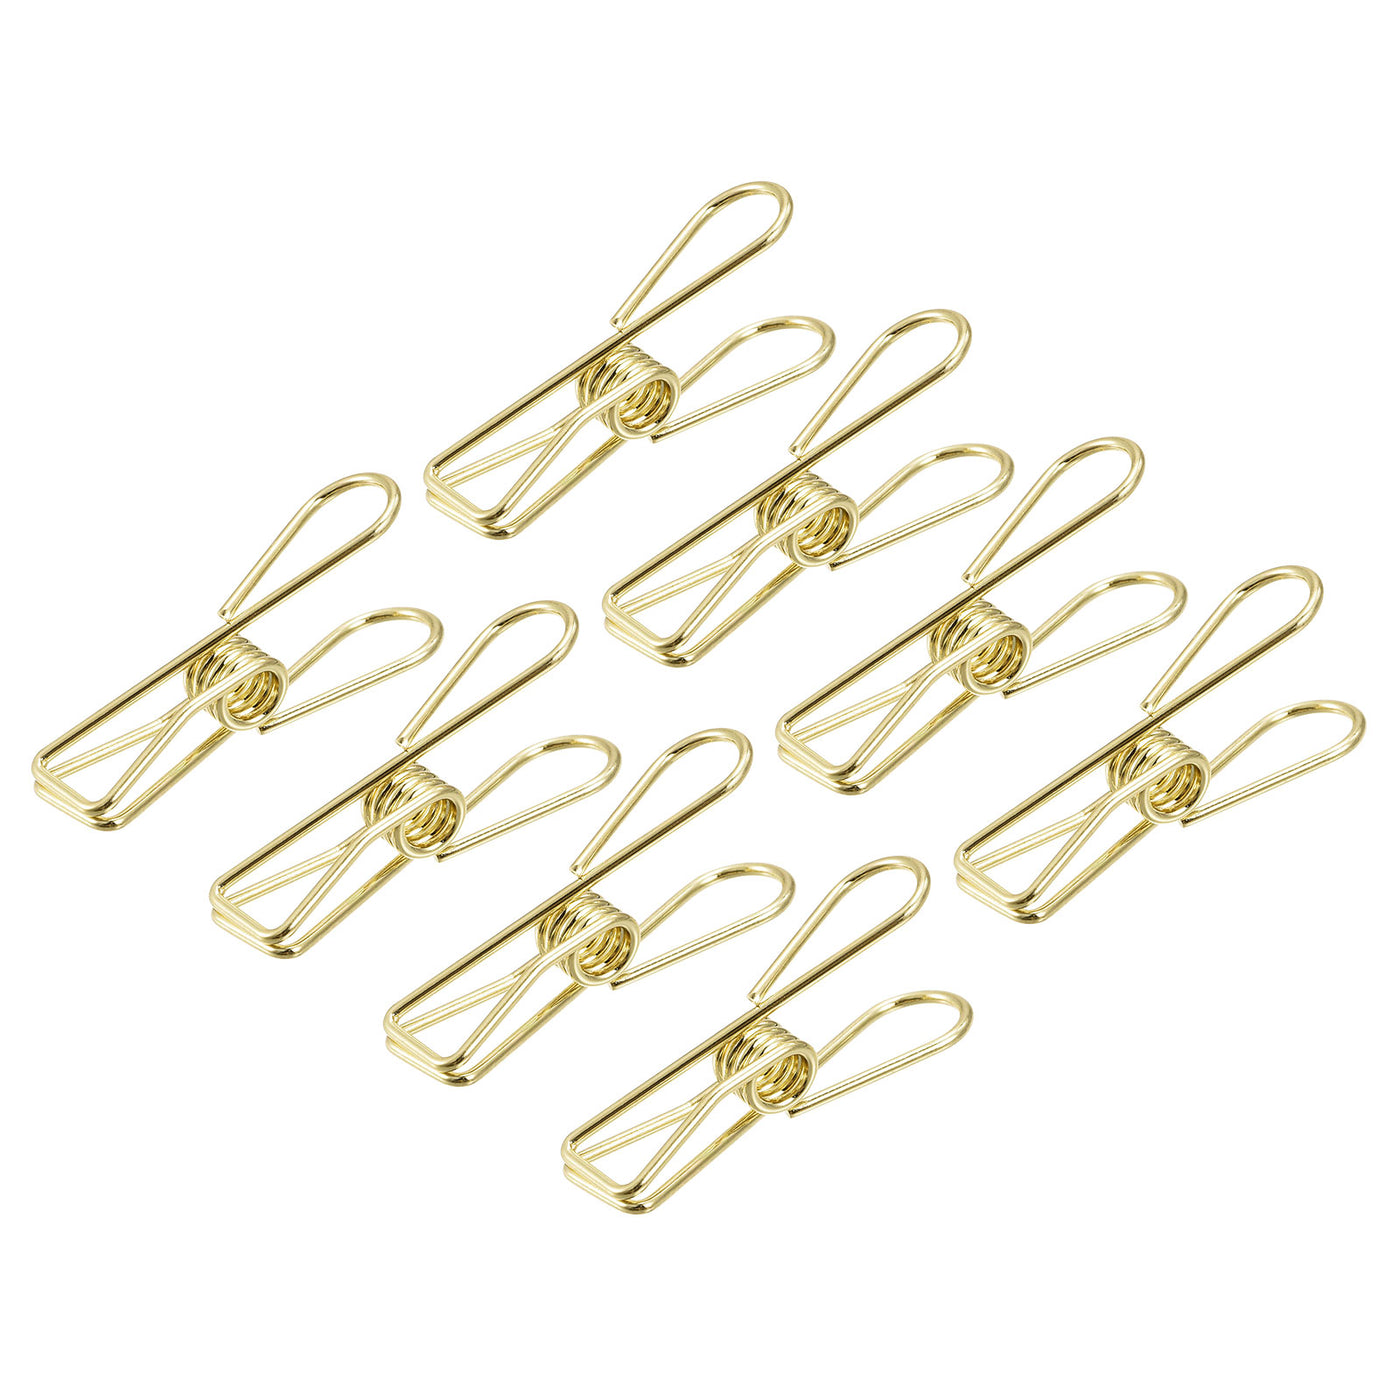 uxcell Uxcell Tablecloth Clips, 32mm Carbon Steel Clamps for Fixing Table Cloth, Gold 16 Pcs